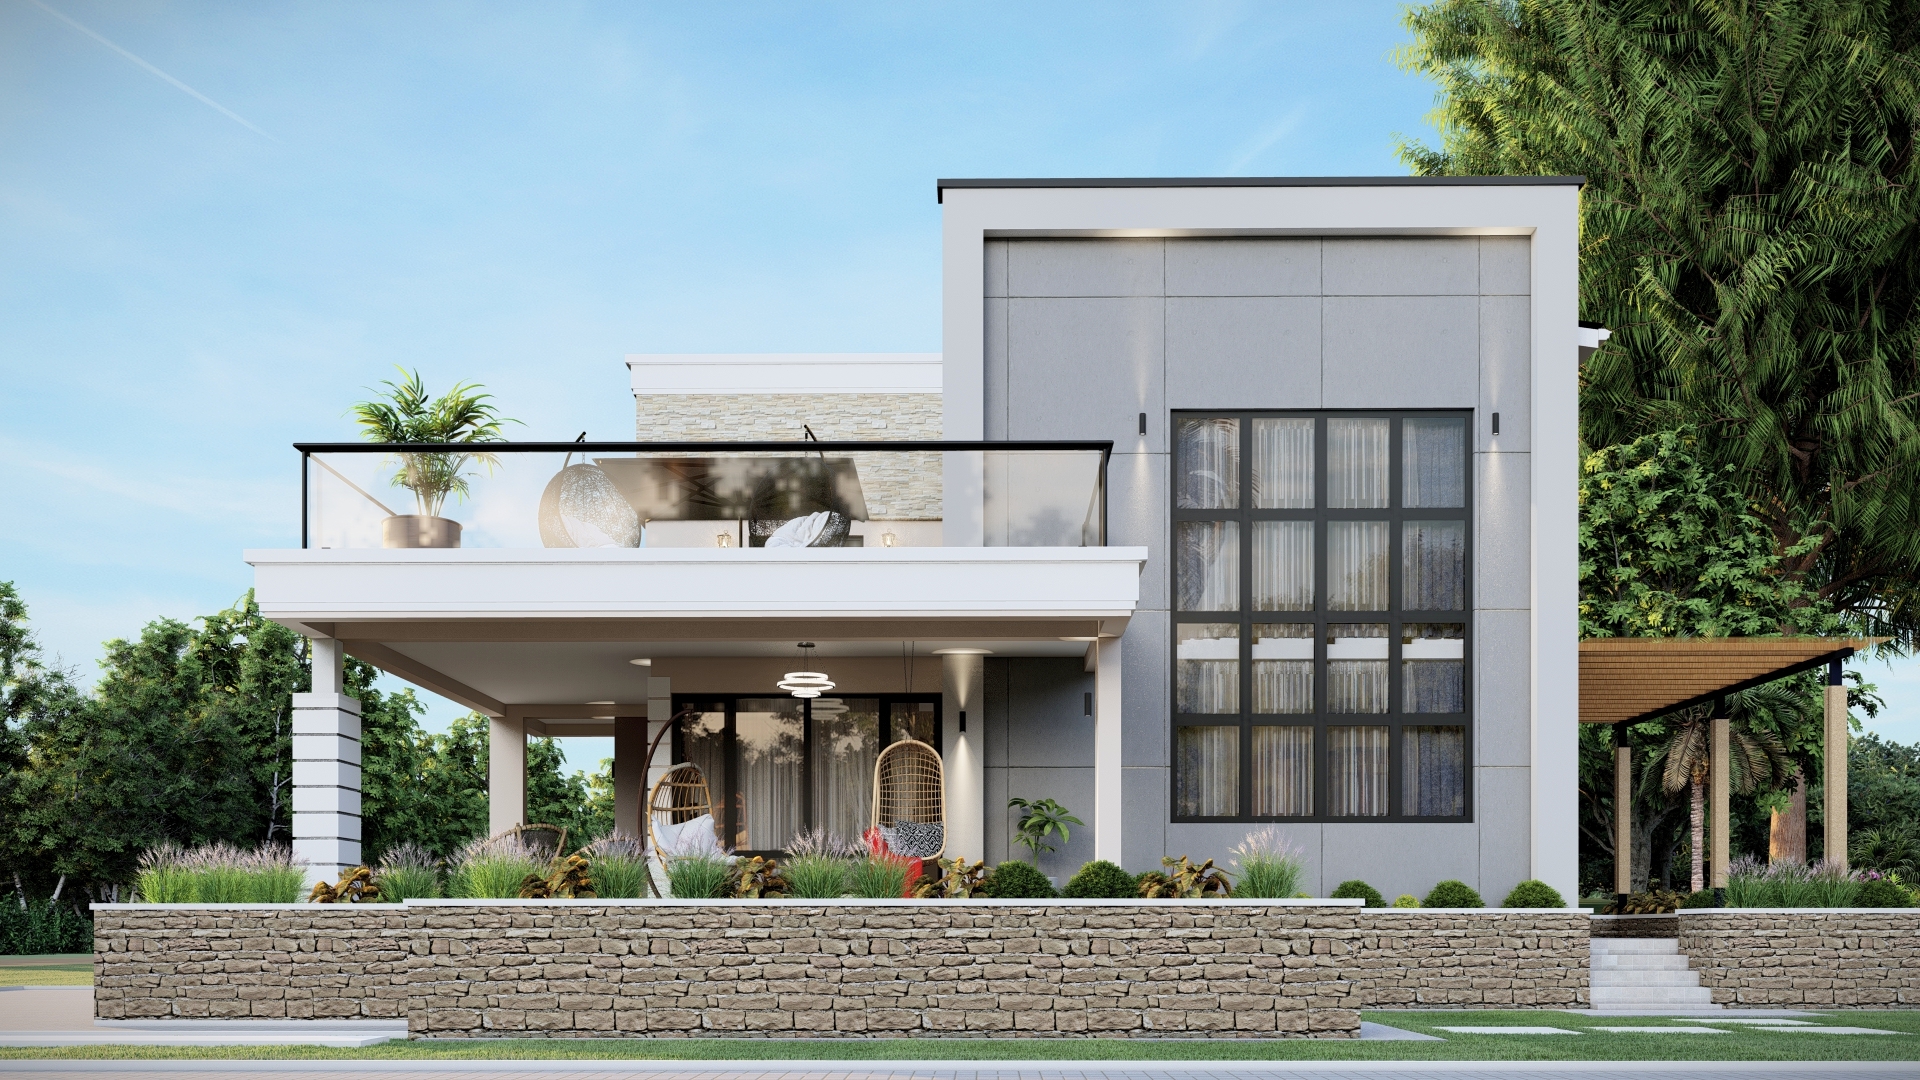 Katvel designs 3d house plans with interior and exterior visual renders